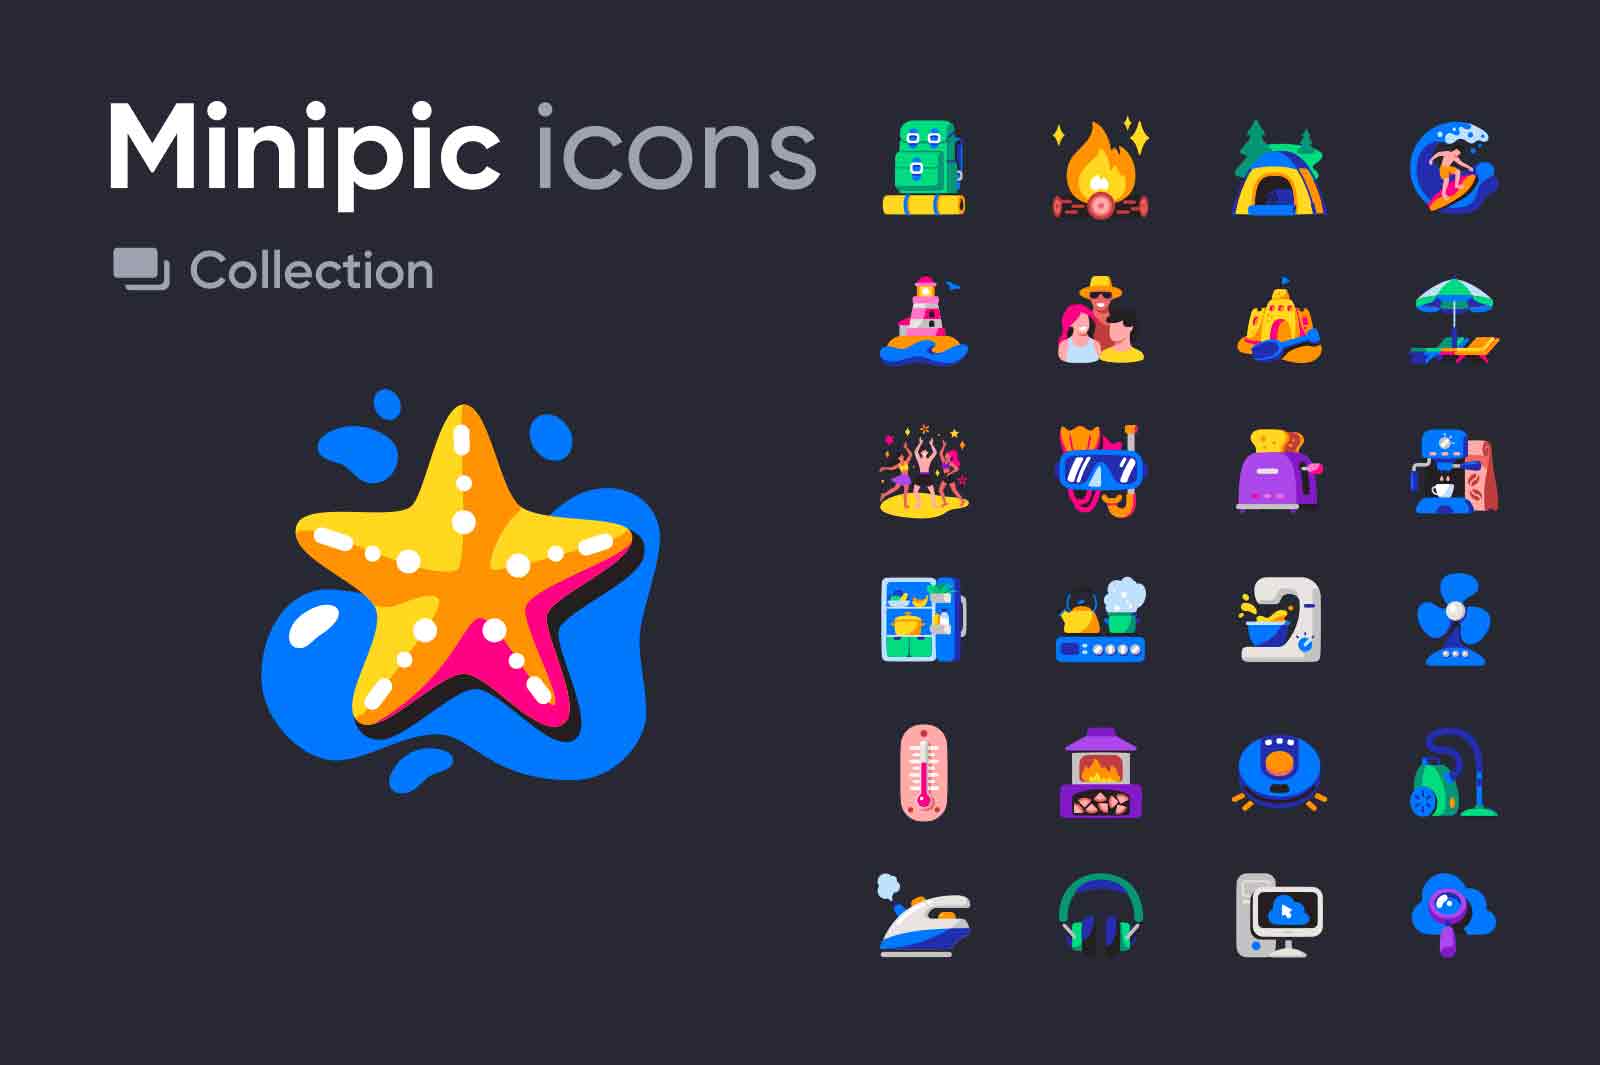 Colorful icons with fun and simple shapes and bright color palette. vgector icons, illustrations. PNG anf EPS file formats included.